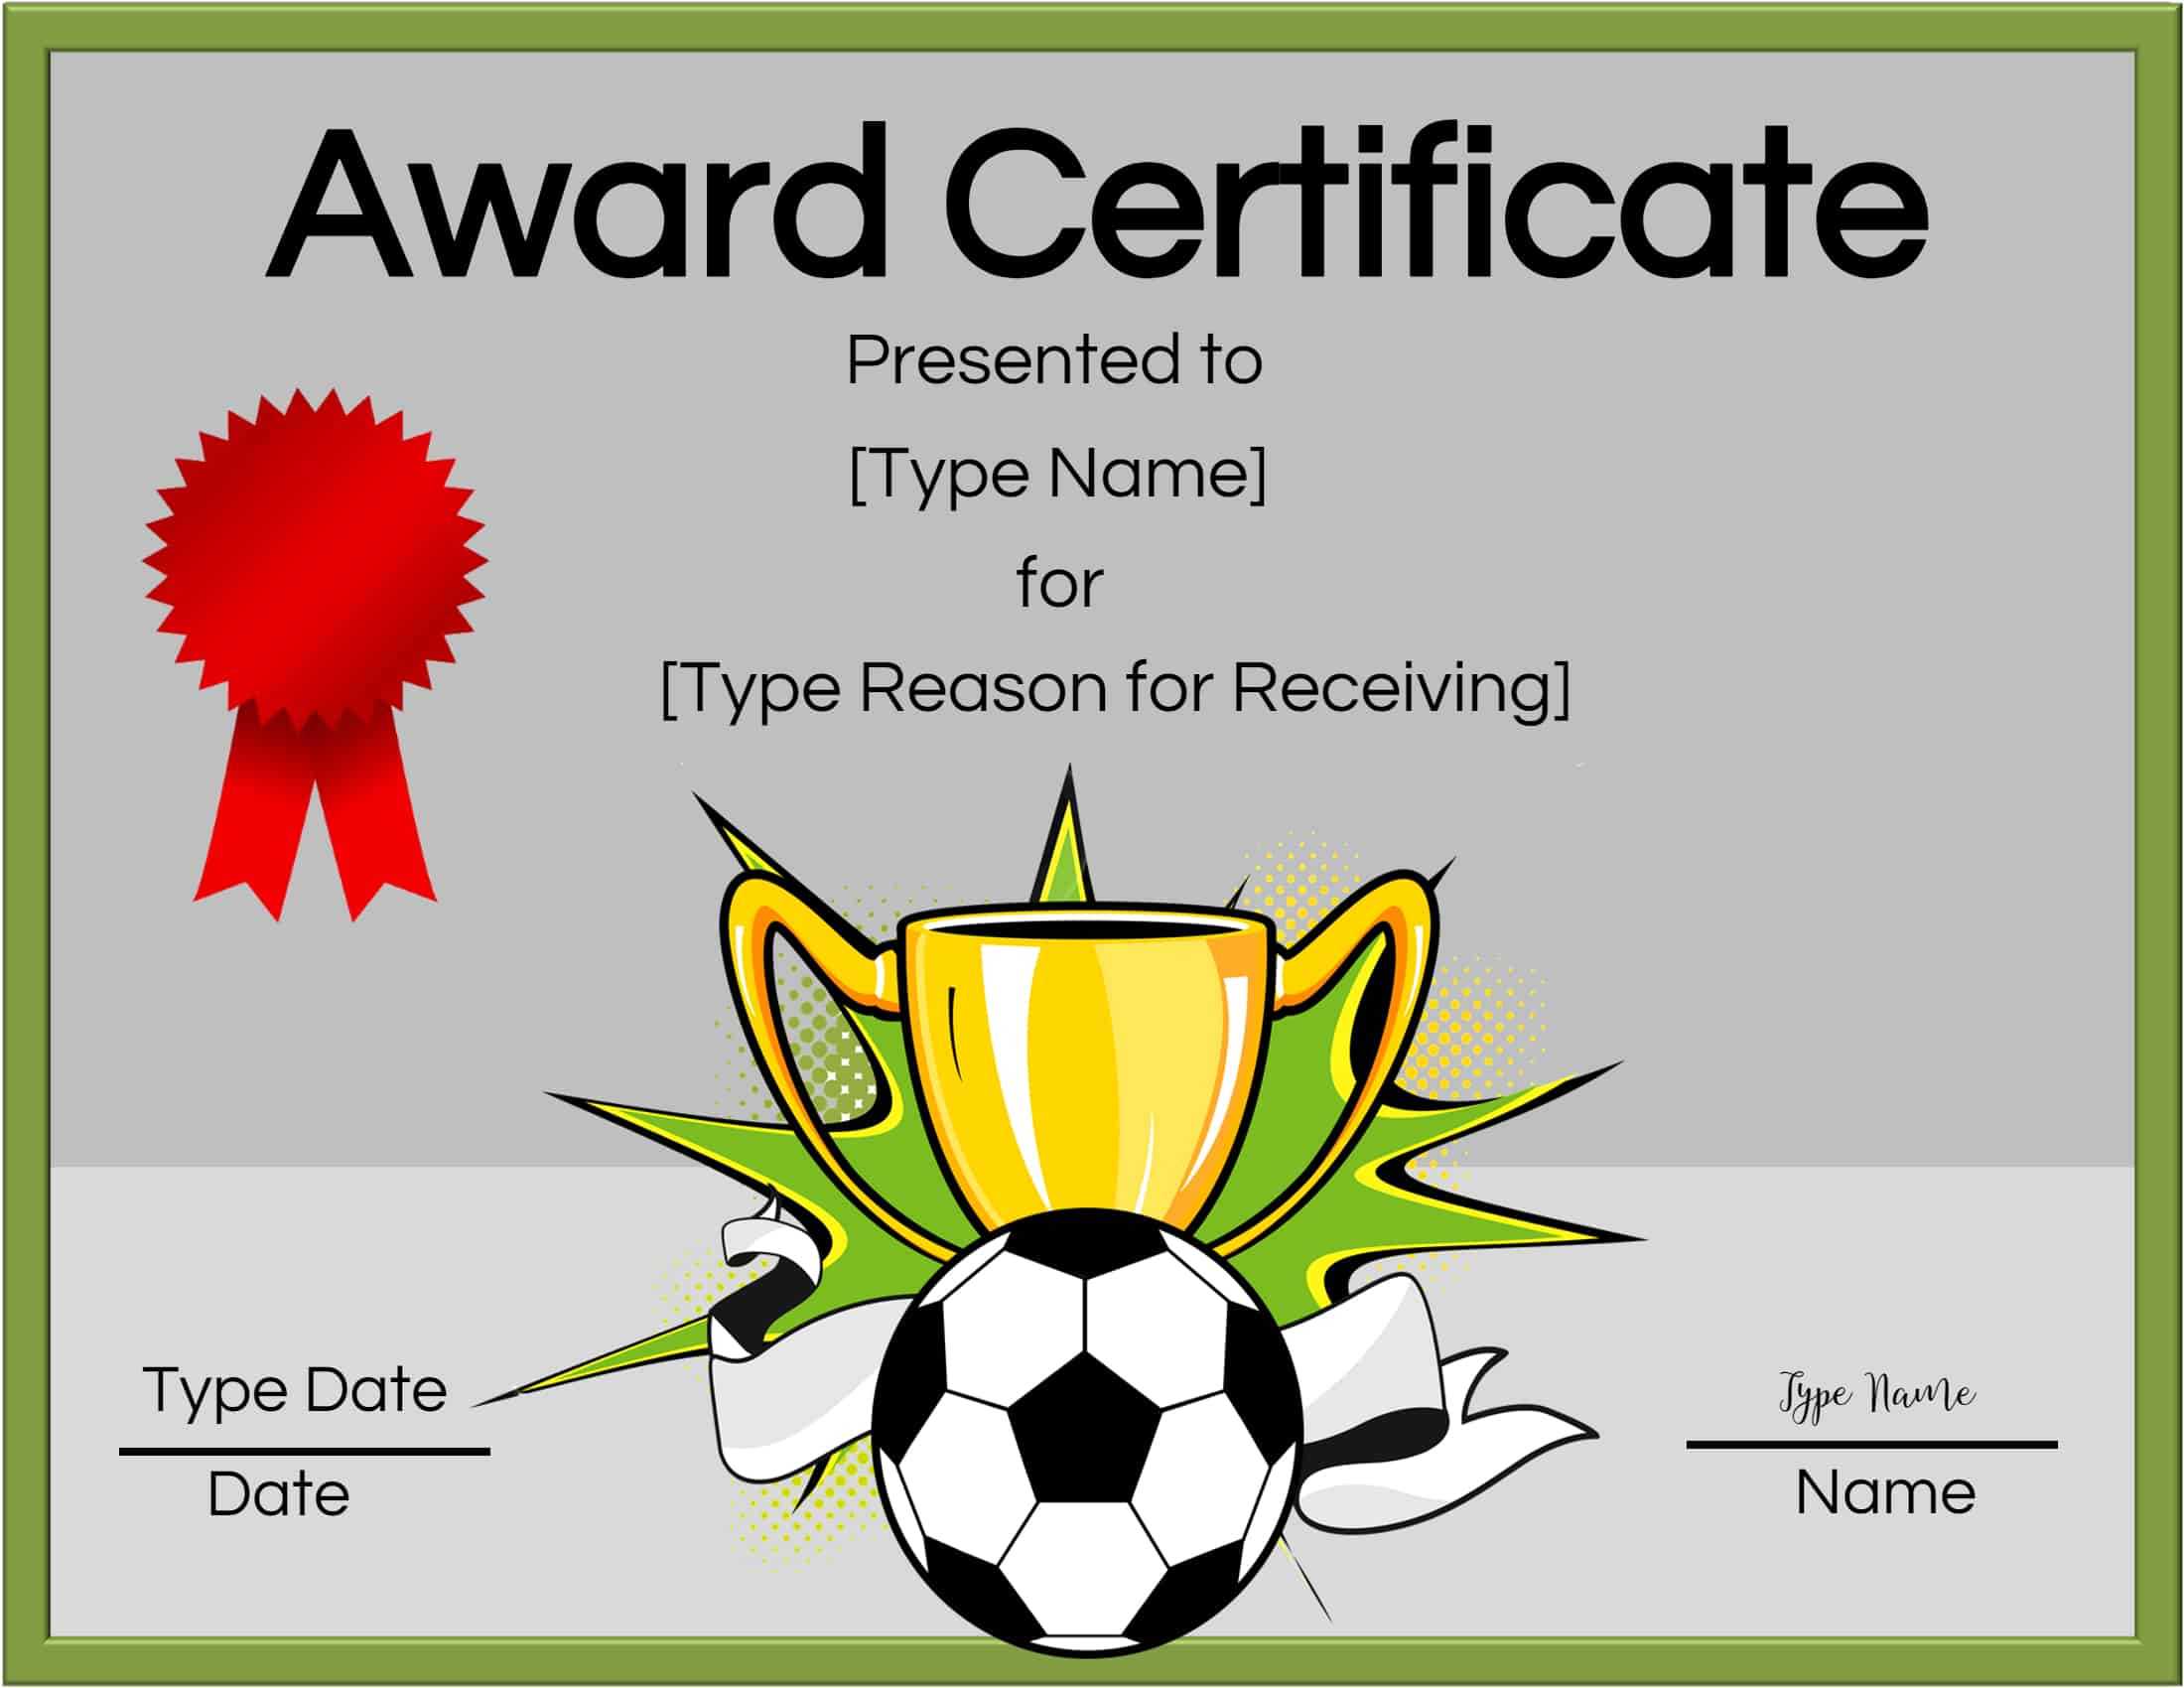 Free Soccer Certificate Maker | Edit Online And Print At Home With Soccer Certificate Templates For Word